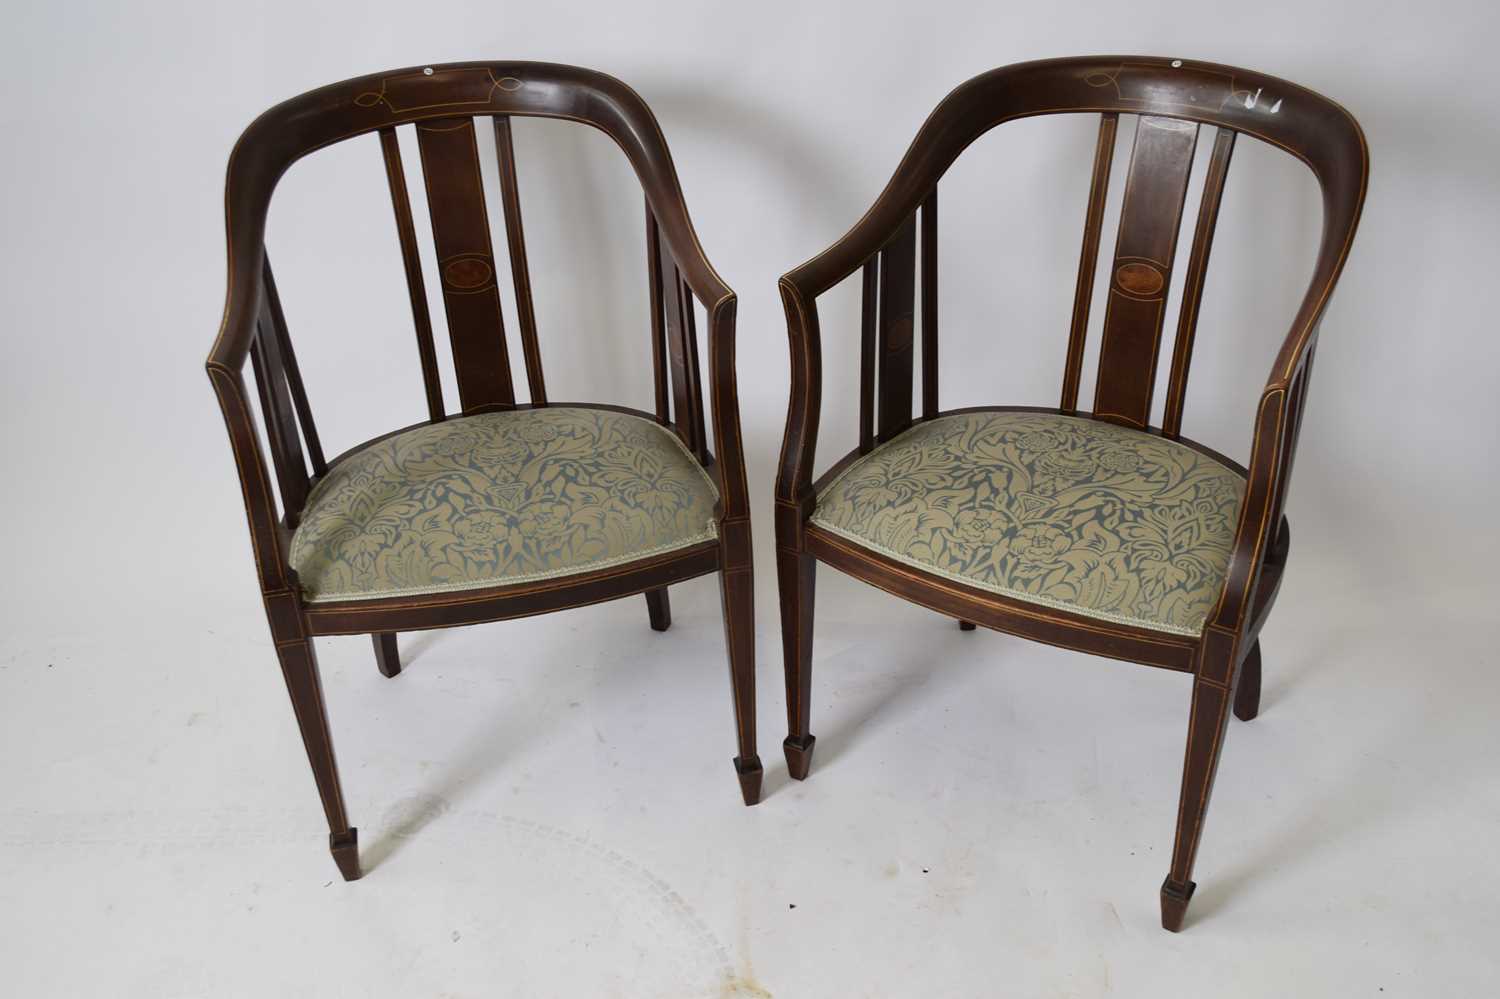 Pair of Edwardian mahogany framed bow back side chairs with blue floral upholstered seats, set on